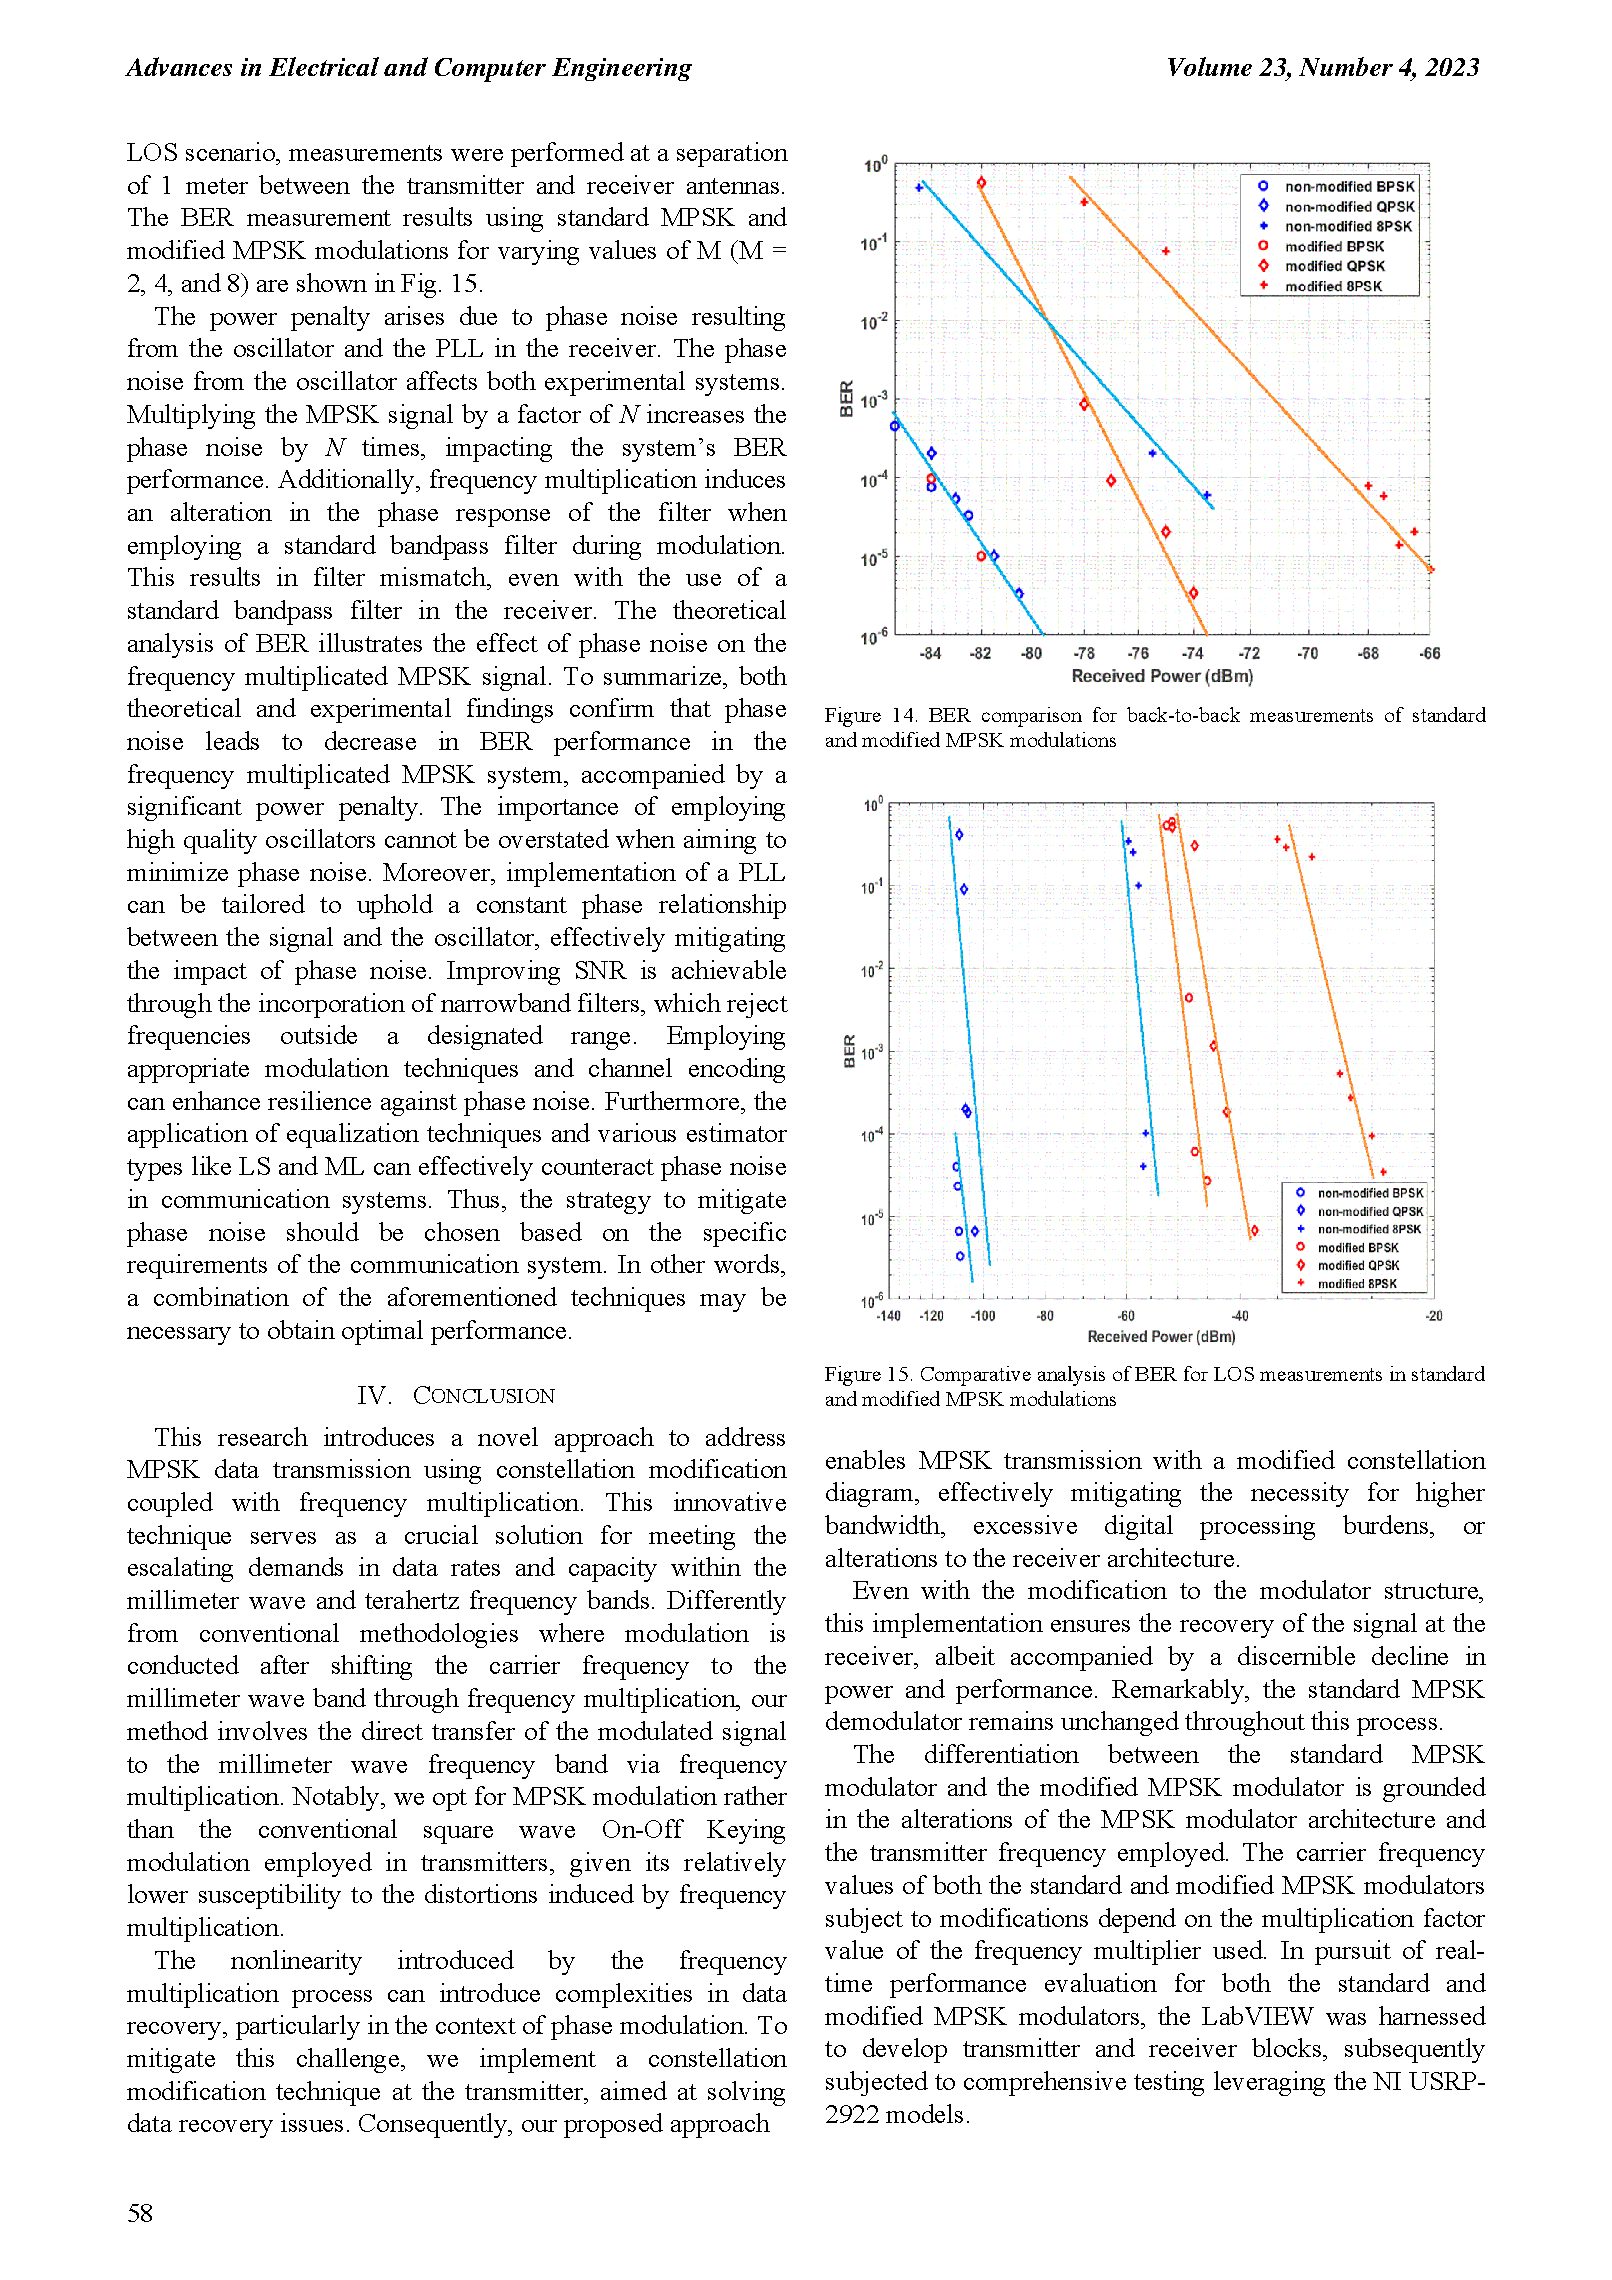 PDF Quickview for paper with DOI:10.4316/AECE.2023.04006